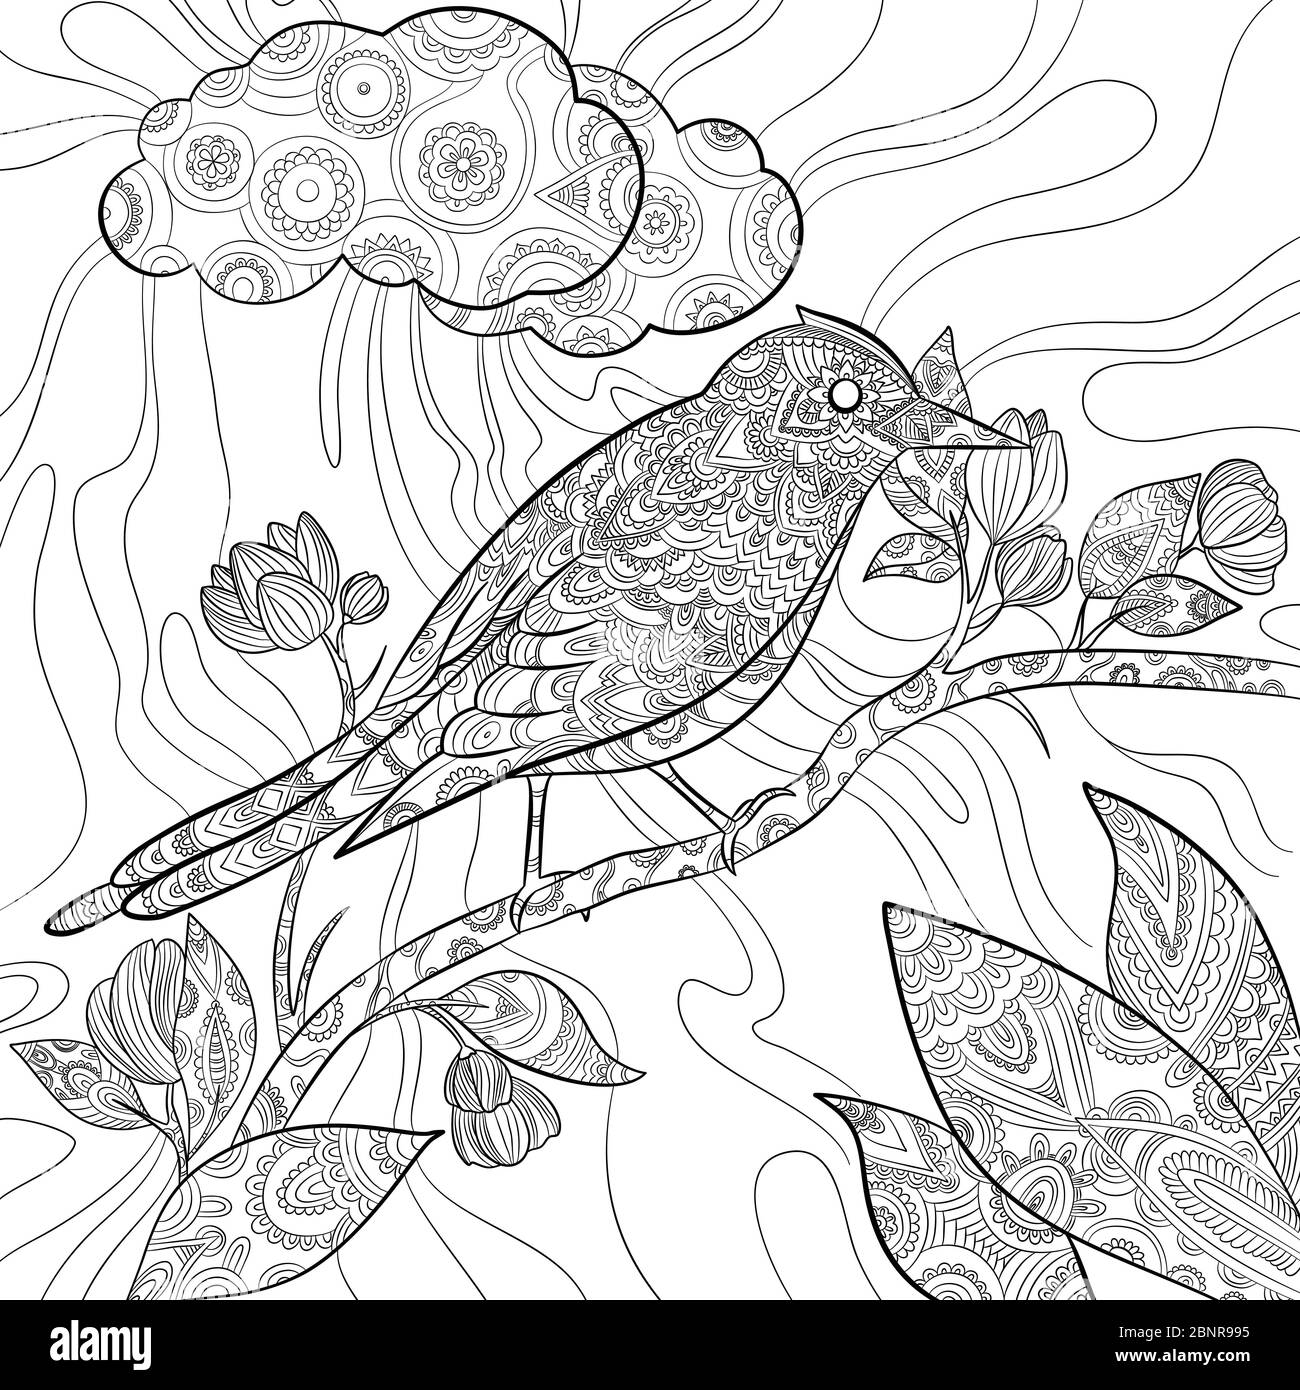 Coloring pages bird. Wild flying animal in sitting on branch ...